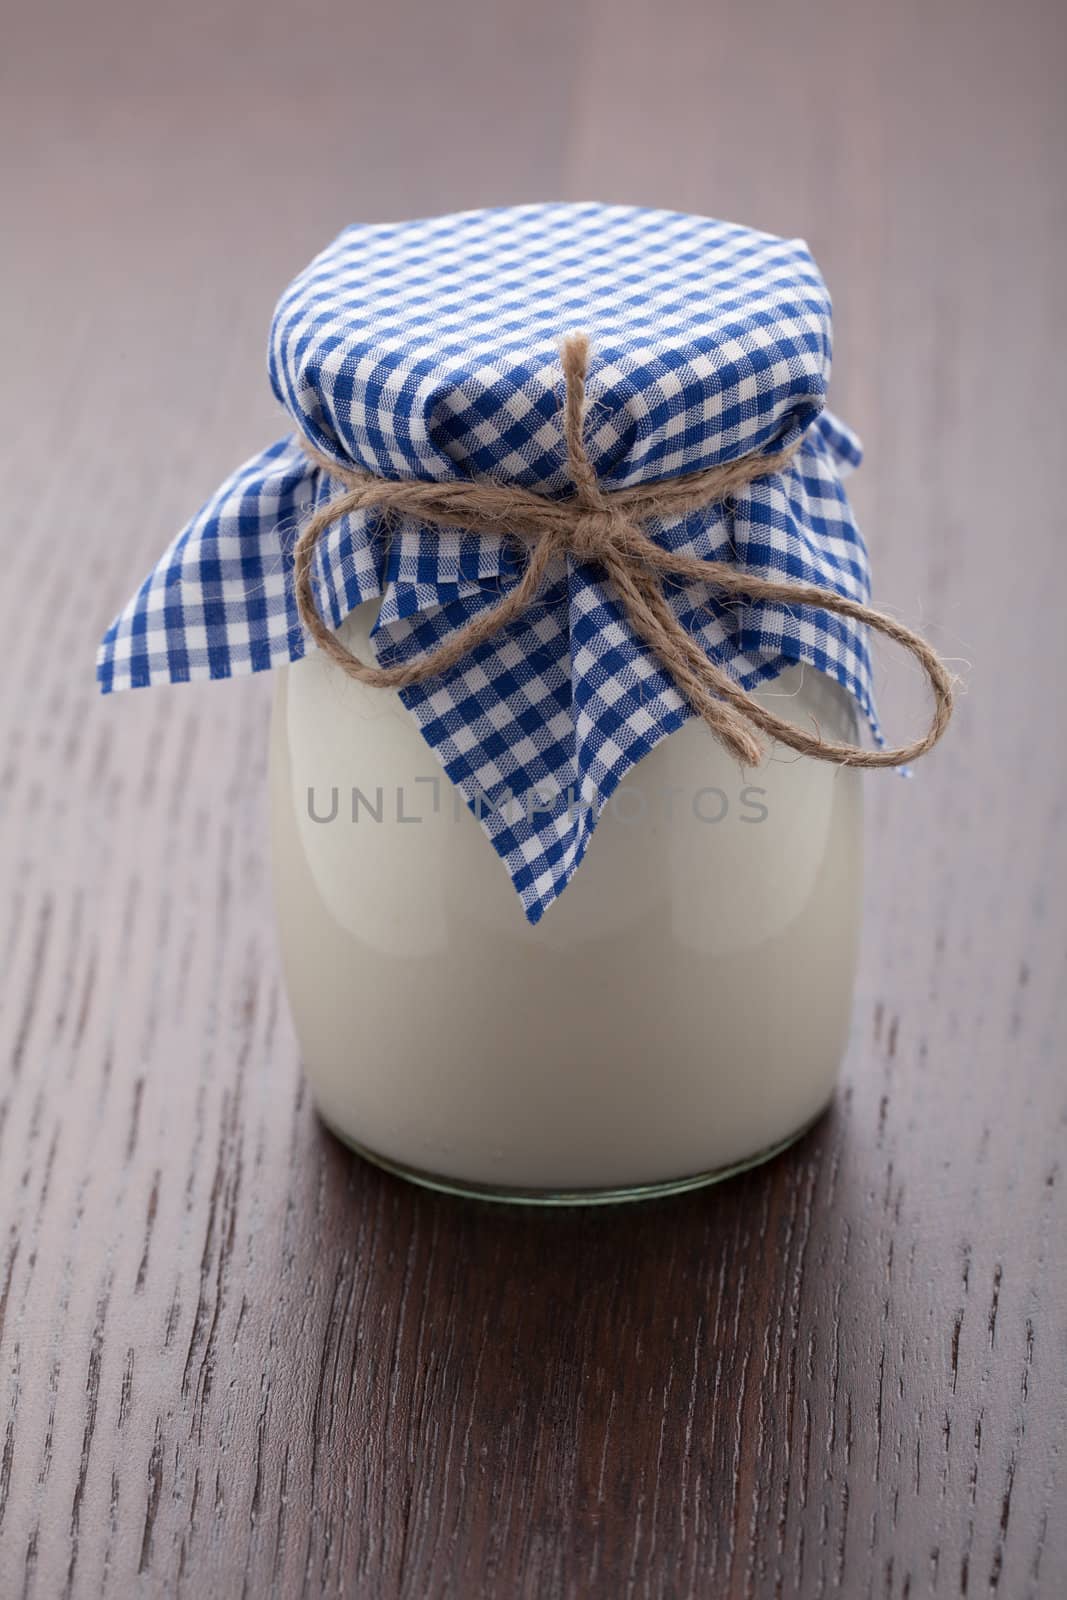 Homemade milk yogurt in glass pot served with linen napkin on wooden table